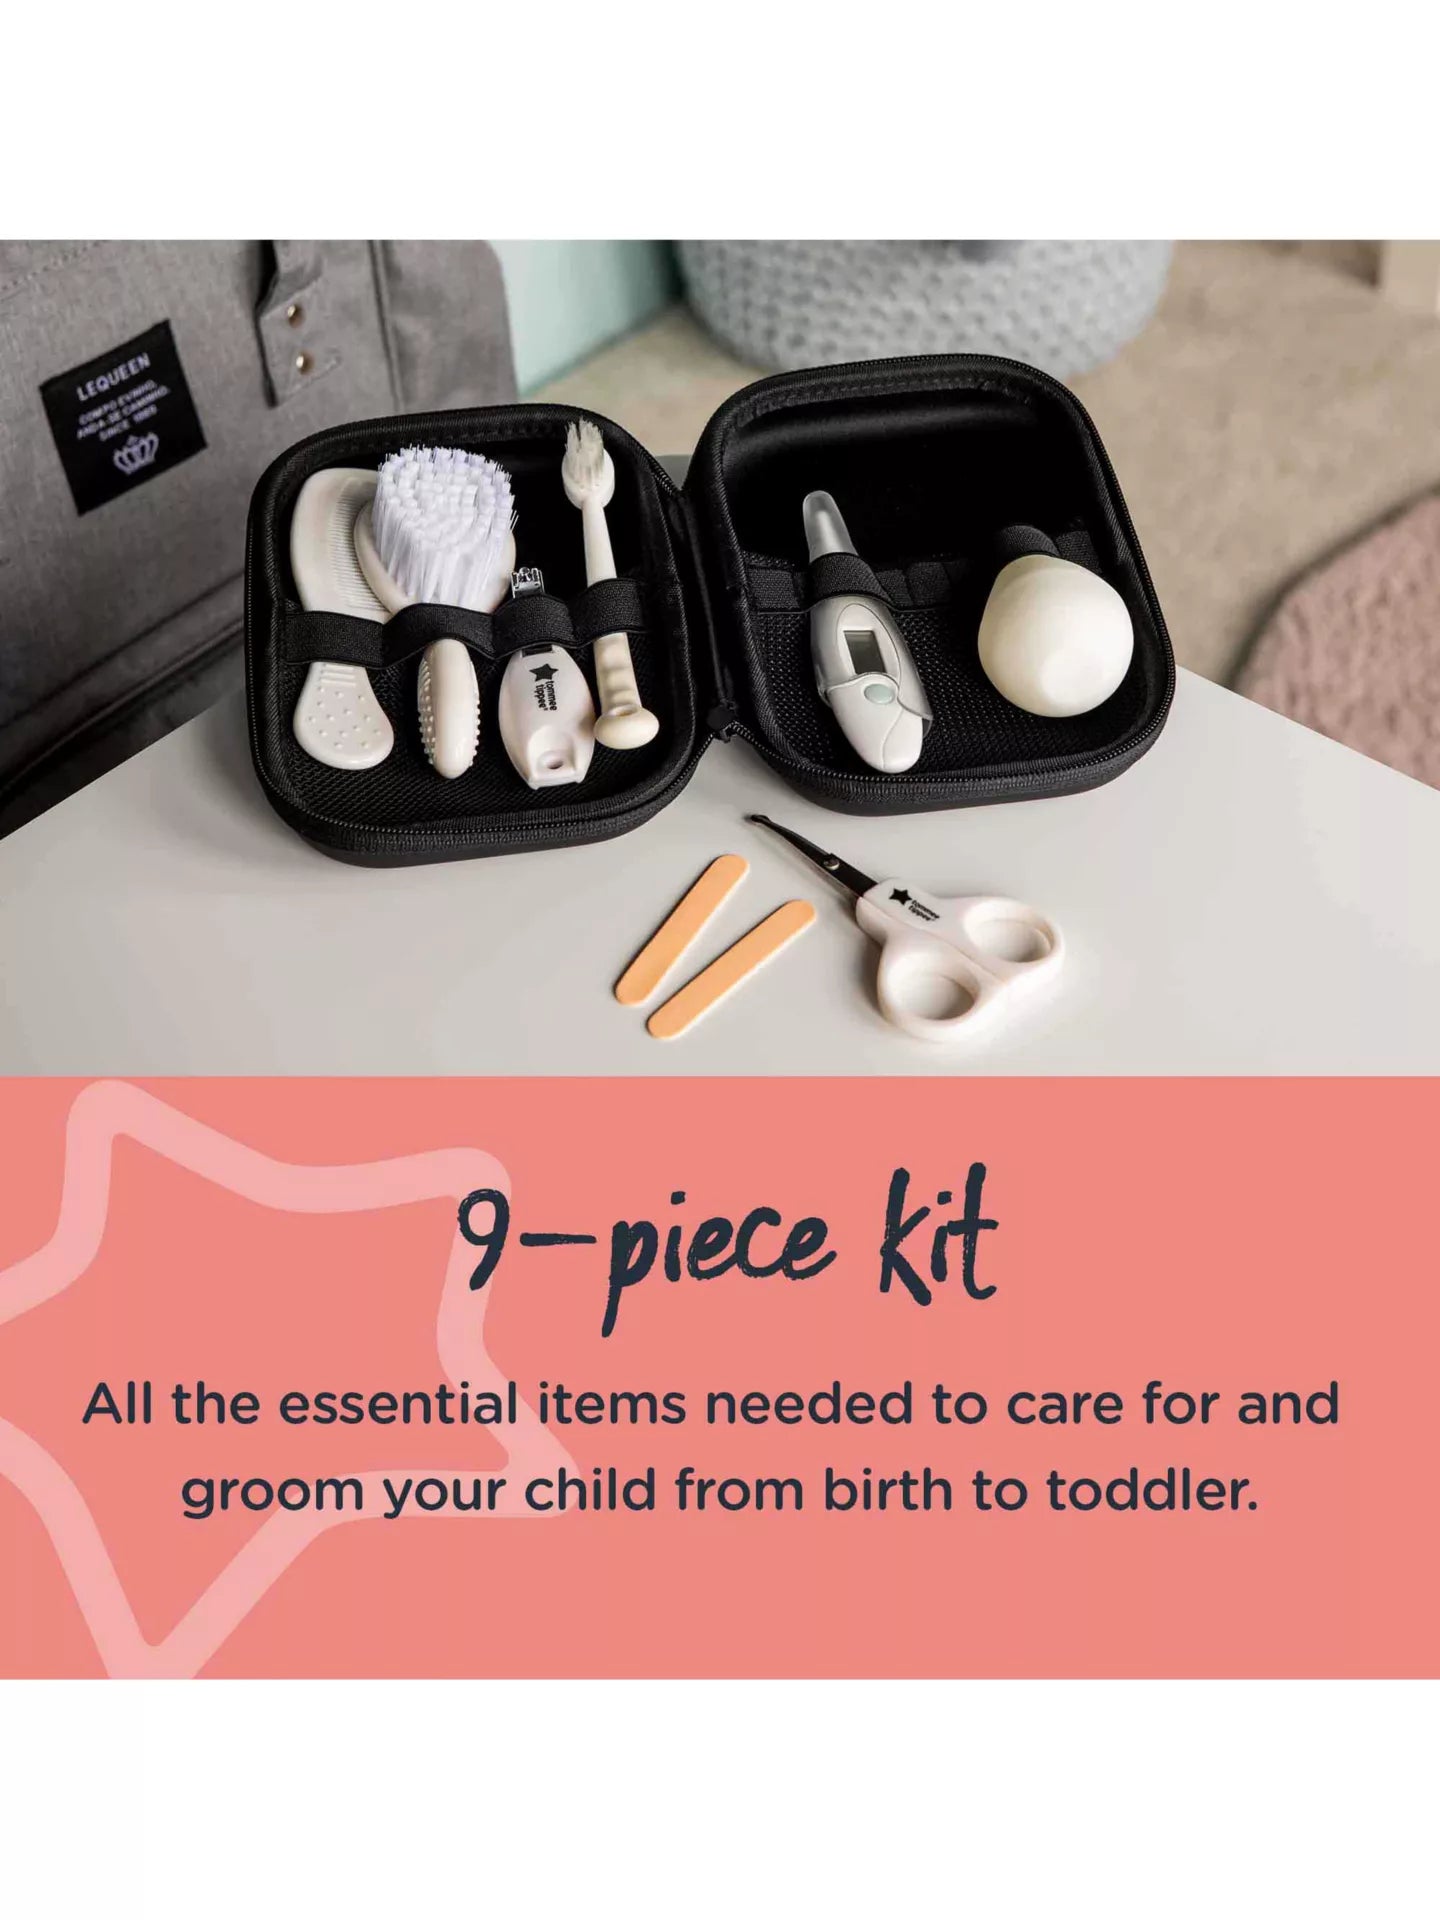 Tommee Tippee Closer to Nature Healthcare Kit